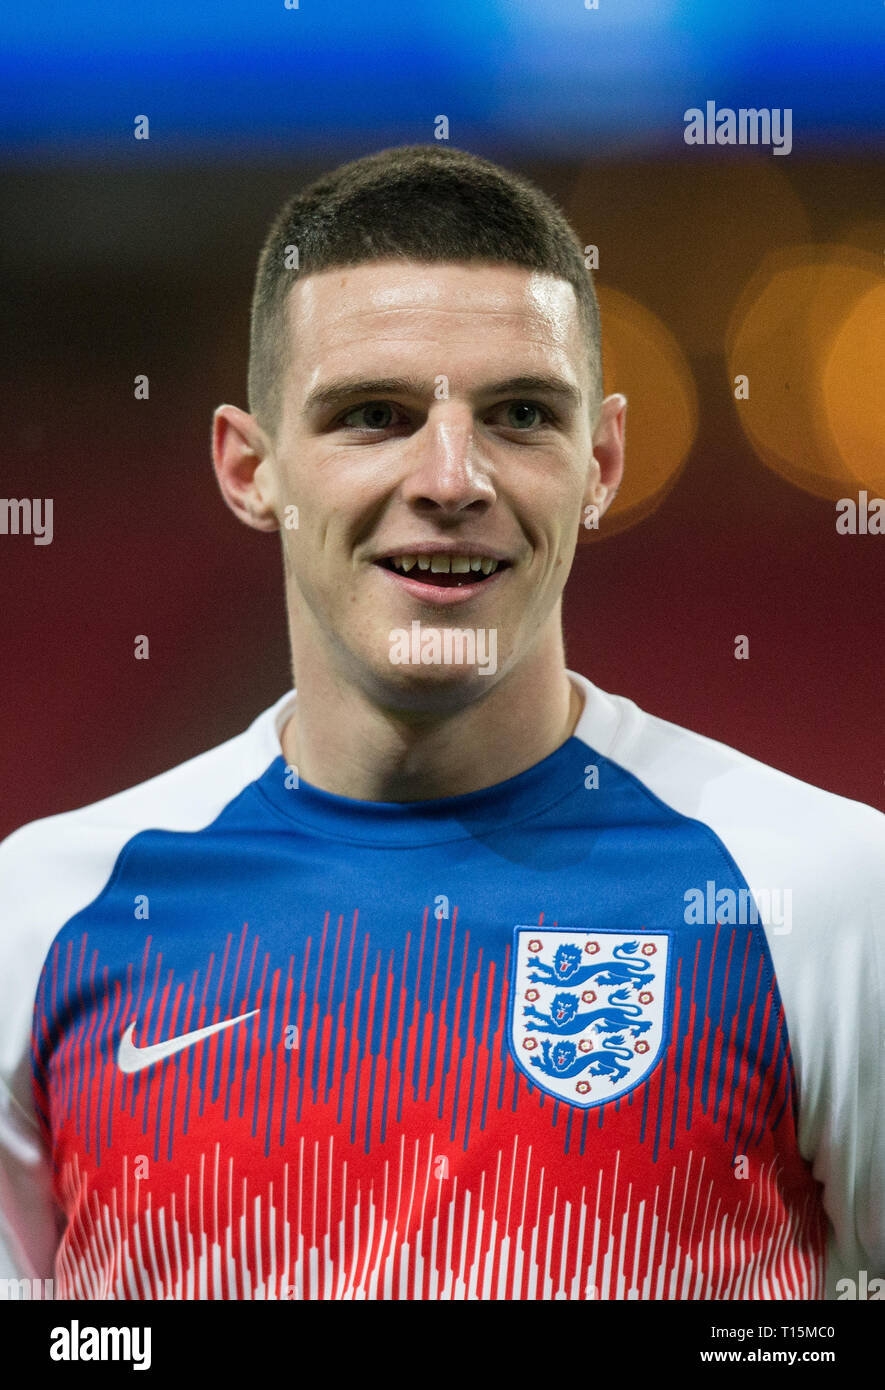 London, UK. 22nd Mar, 2019. Declan RICE (WHU) of England pre match during the UEFA 2020 Euro Qualifier match between England and Czech Republic at Wembley Stadium, London, England on 22 March 2019. Photo by Andy Rowland/PRiME Media Images. Credit: Andrew Rowland/Alamy Live News Stock Photo